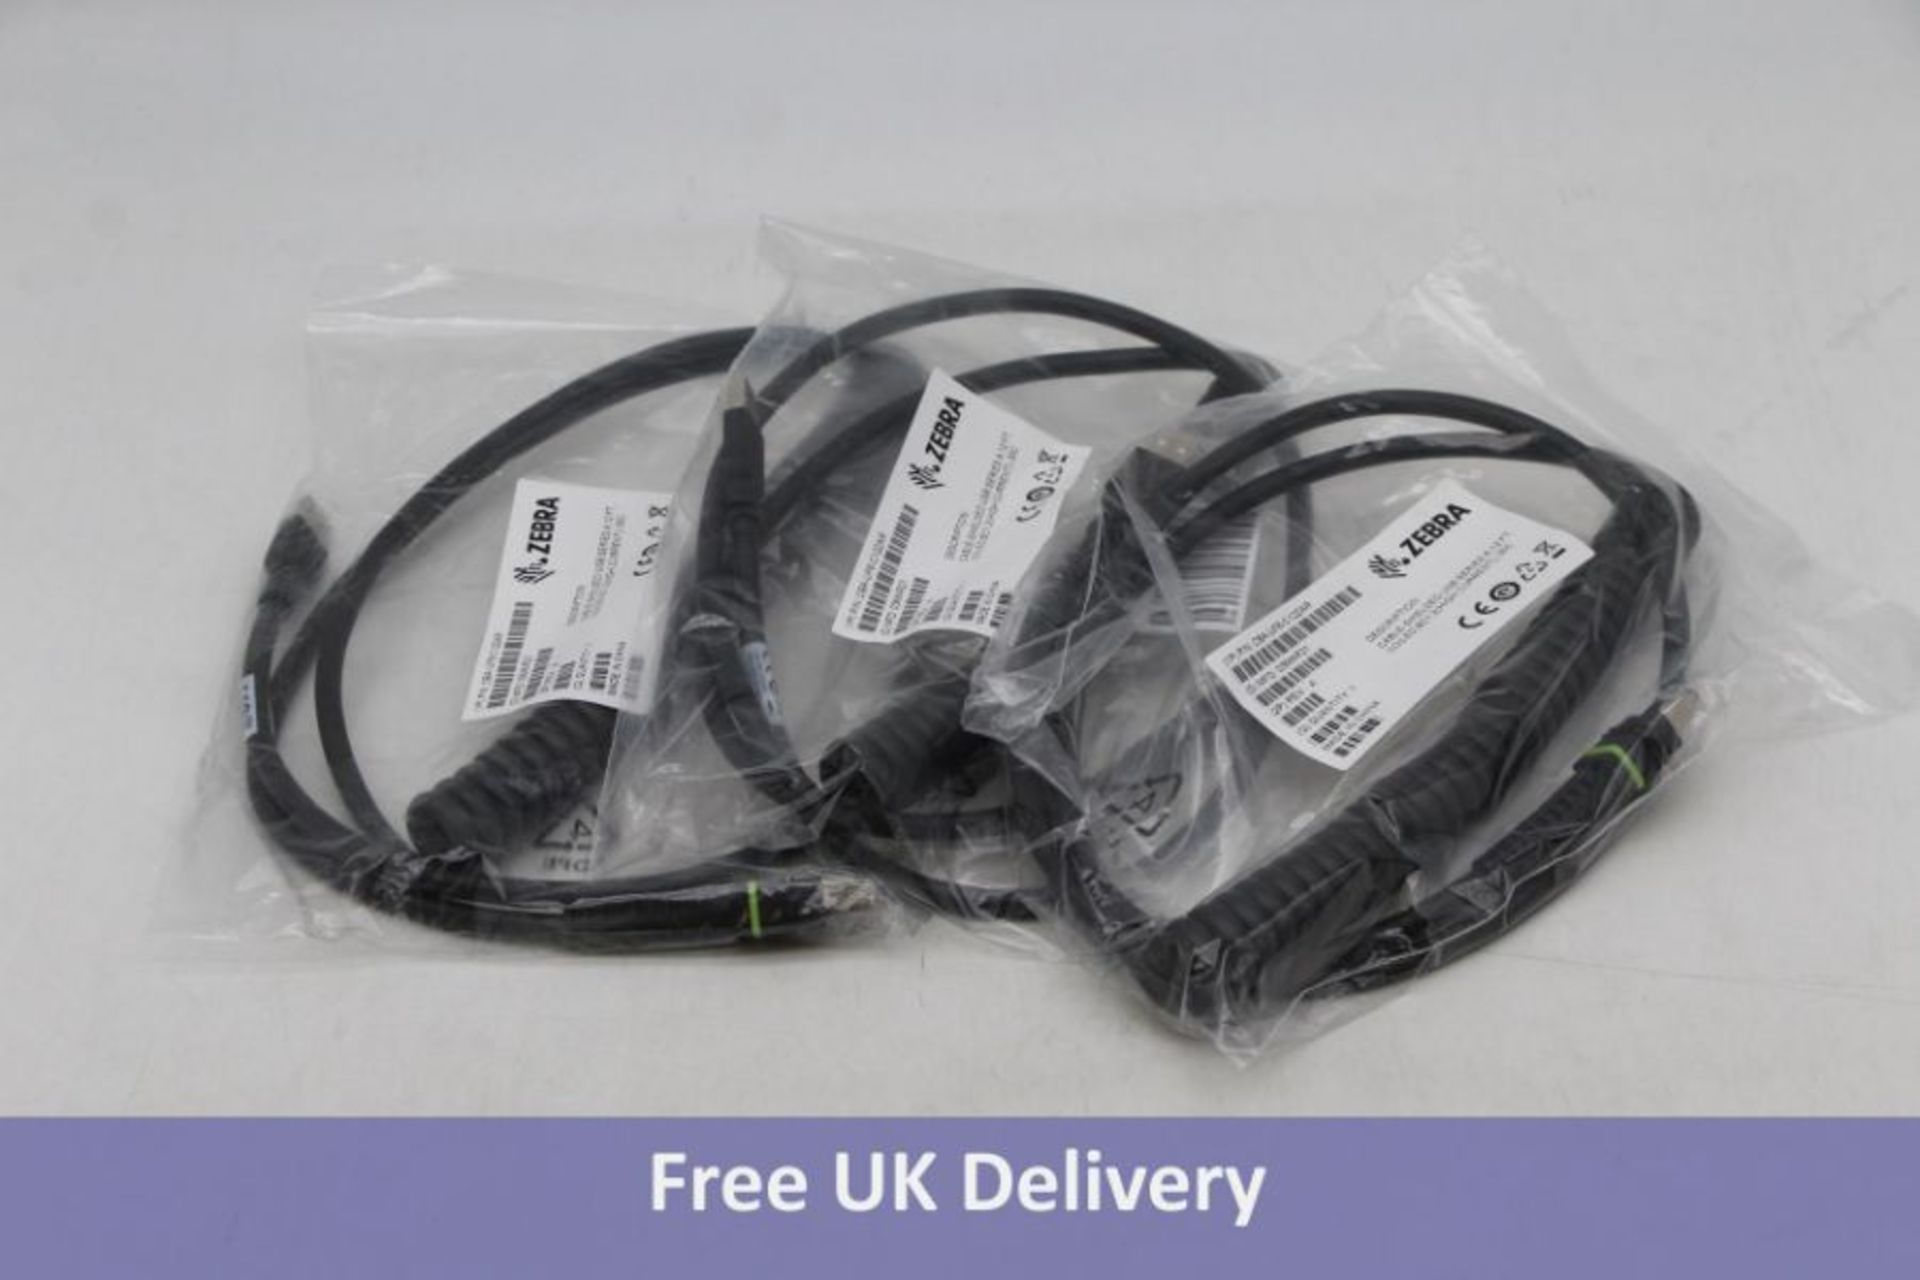 Three Zebra Cable Shielded USB Series A, Size 12FT